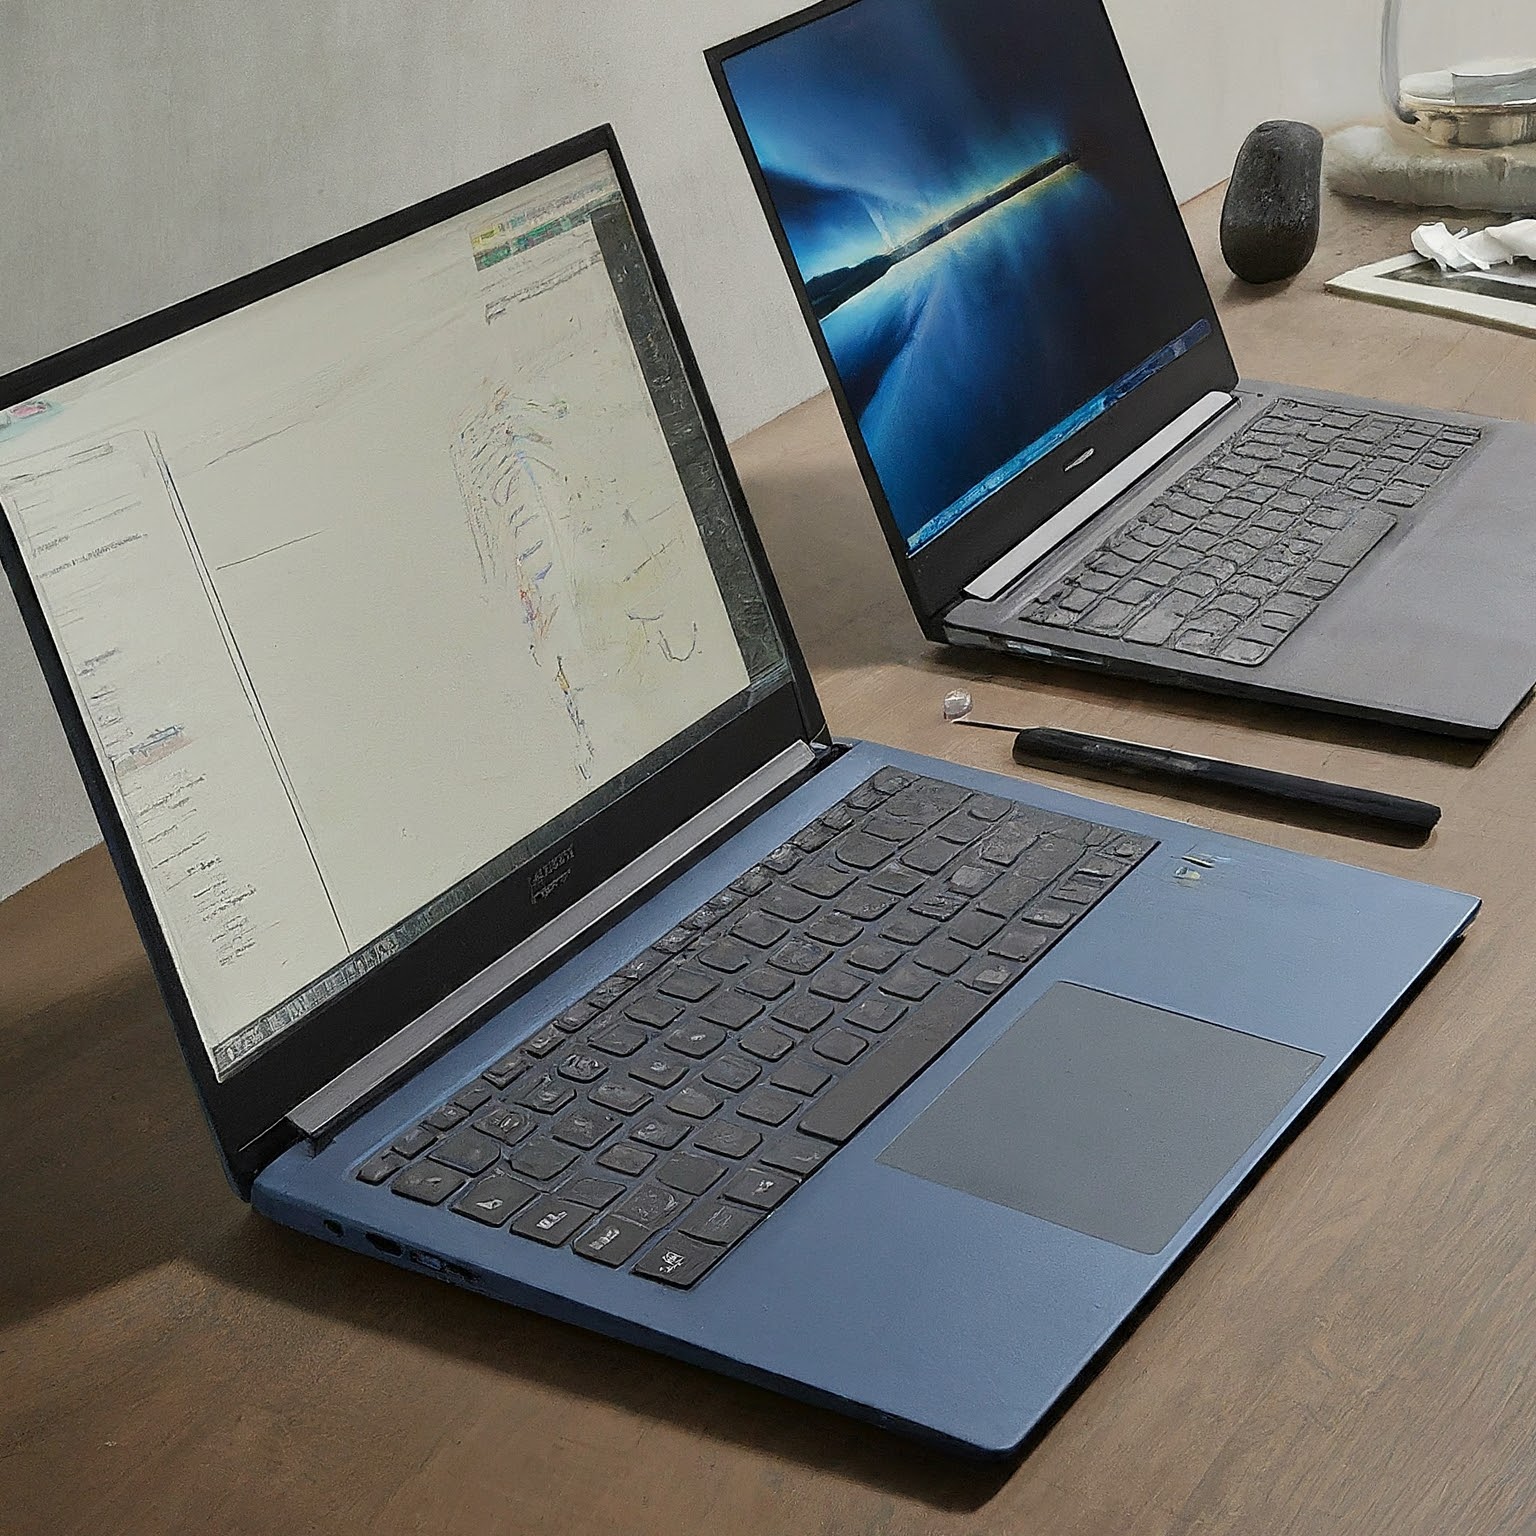 Dell XPS 15 vs. XPS 16: Which is Right for You?